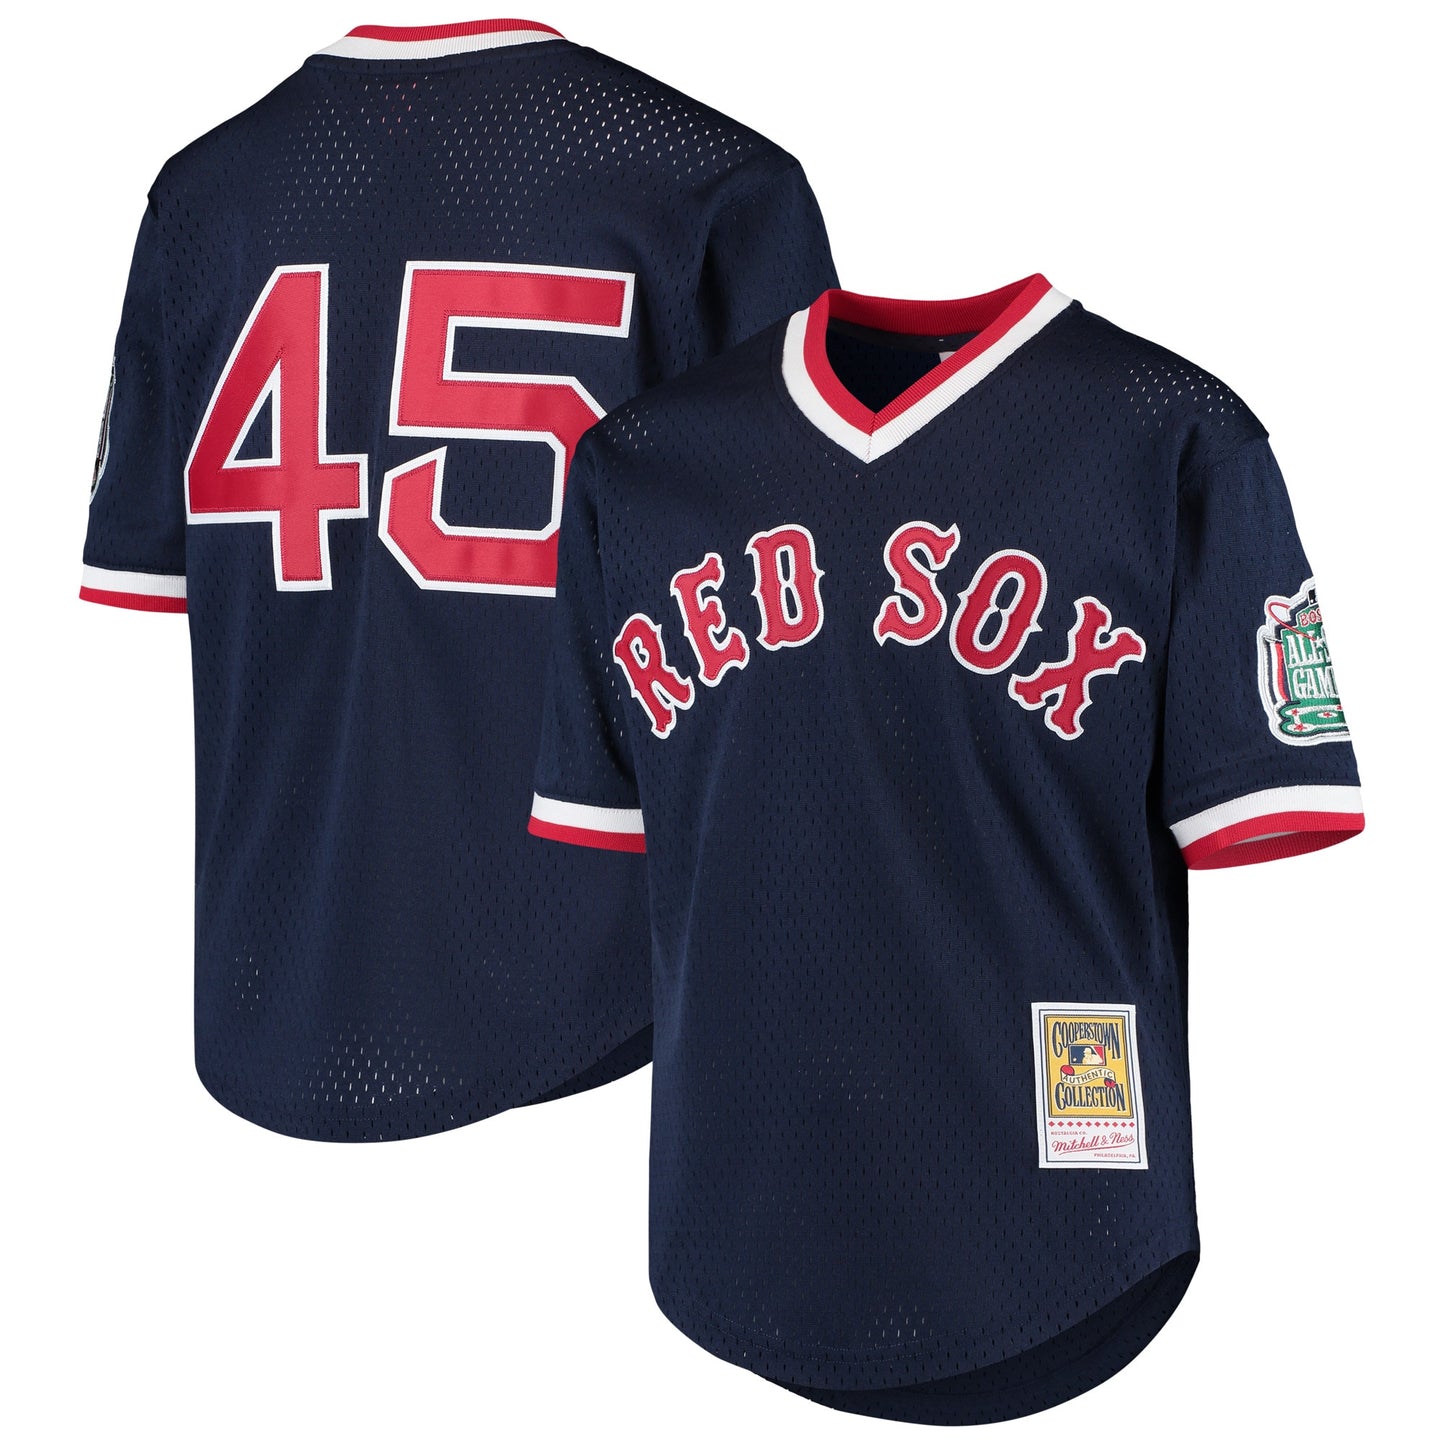 Pedro Martinez Boston Red Sox Mitchell & Ness Youth Cooperstown Collection Mesh Batting Practice Jersey - Navy